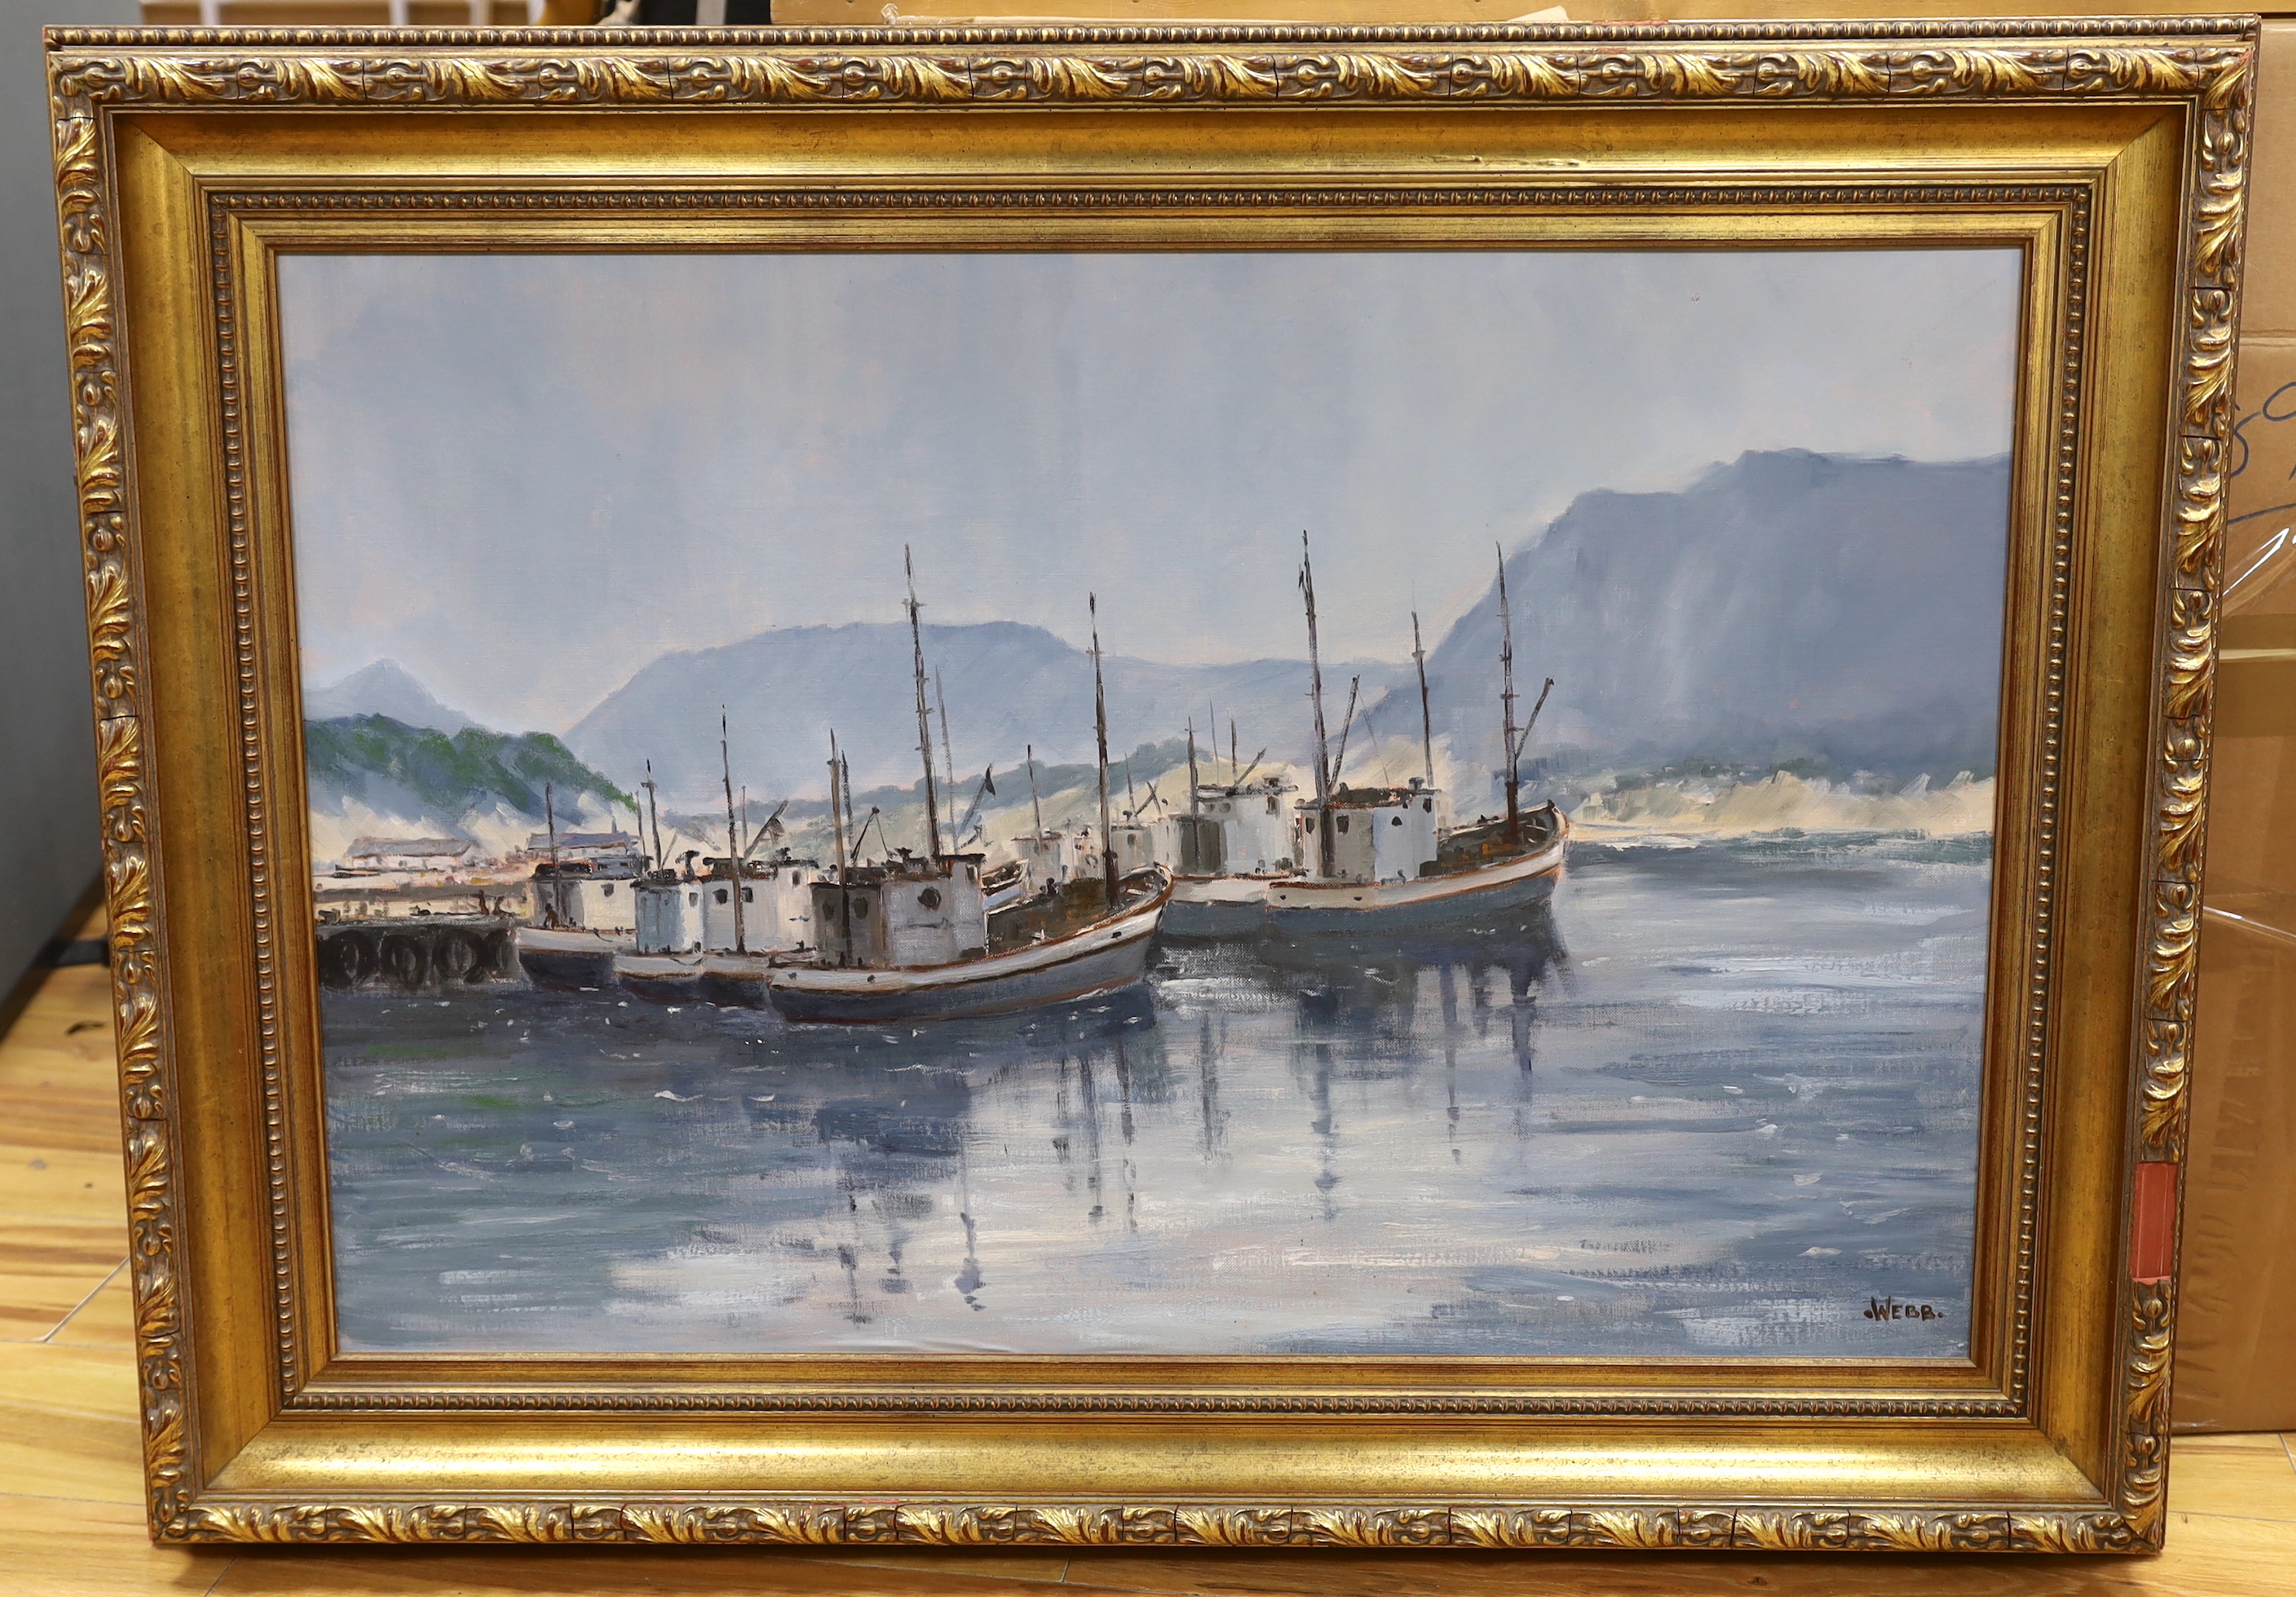 Webb, oil on canvas, Fishing boats in harbour, signed, 60 x 90cm